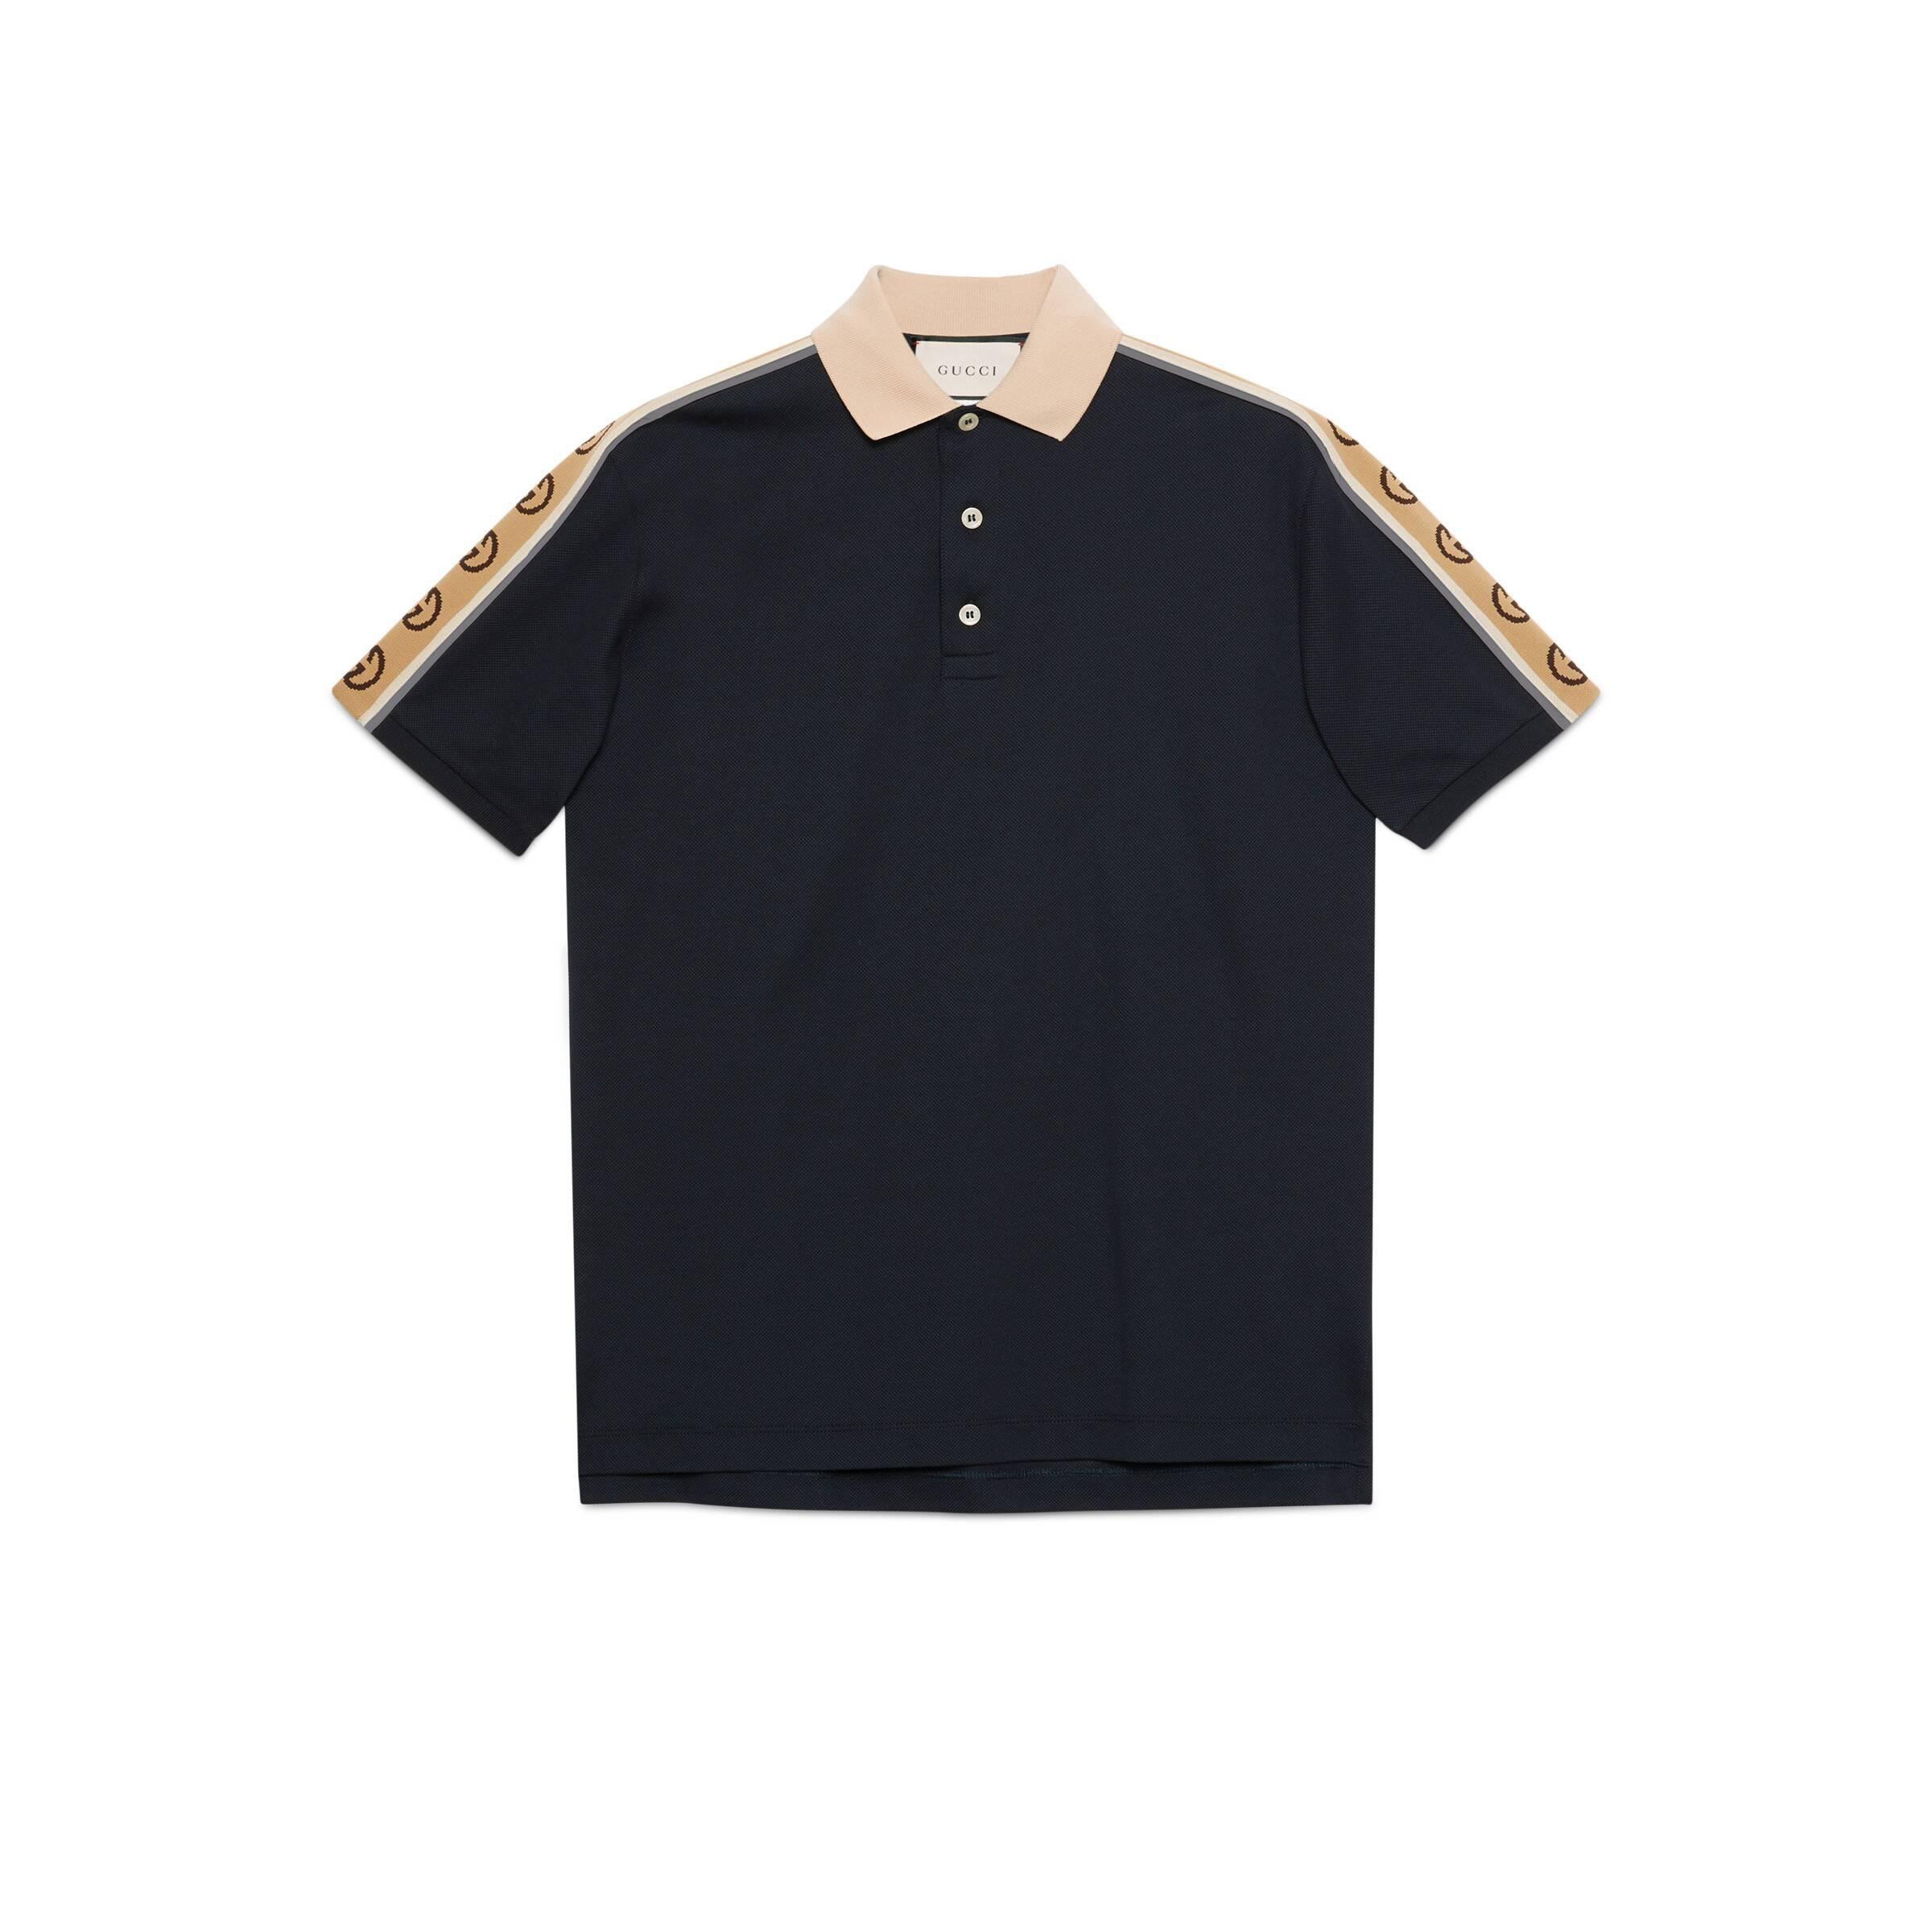 Gucci Cotton Polo With Interlocking G Stripe in Blue for Men - Lyst